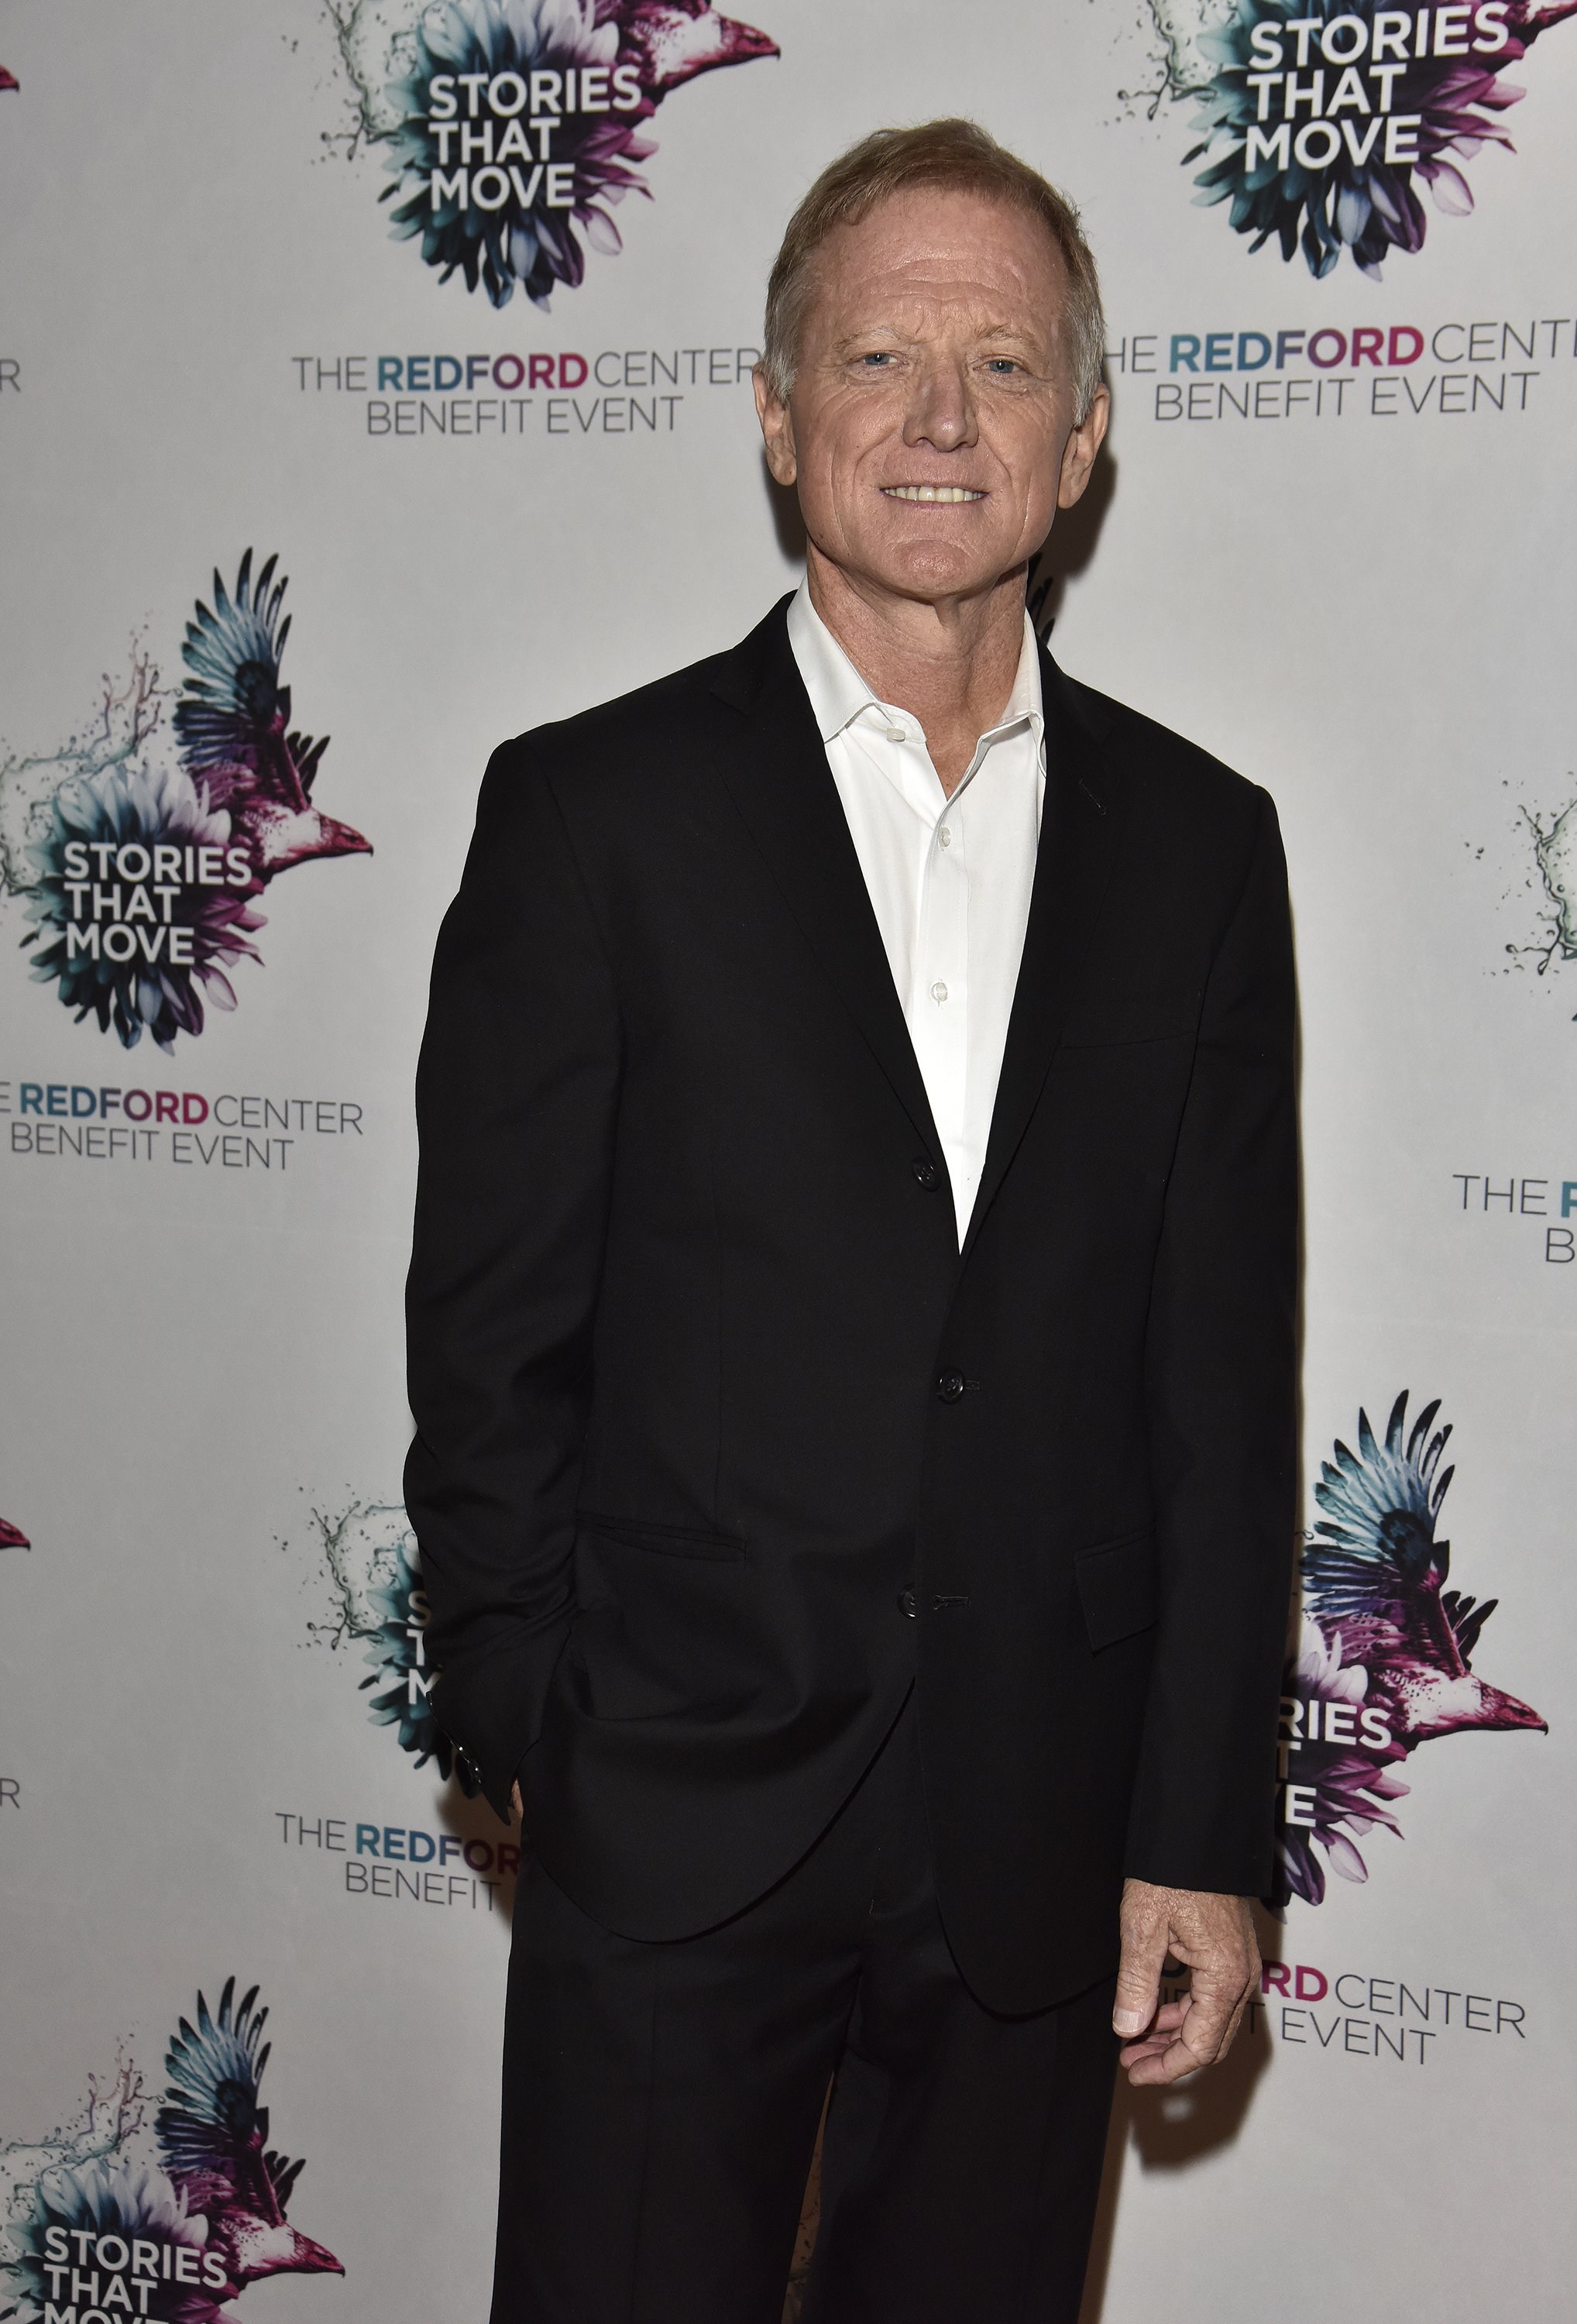 James Redford attends The Redford Center's Benefit on December 6, 2018, in San Francisco, California. | Source: Getty Images.